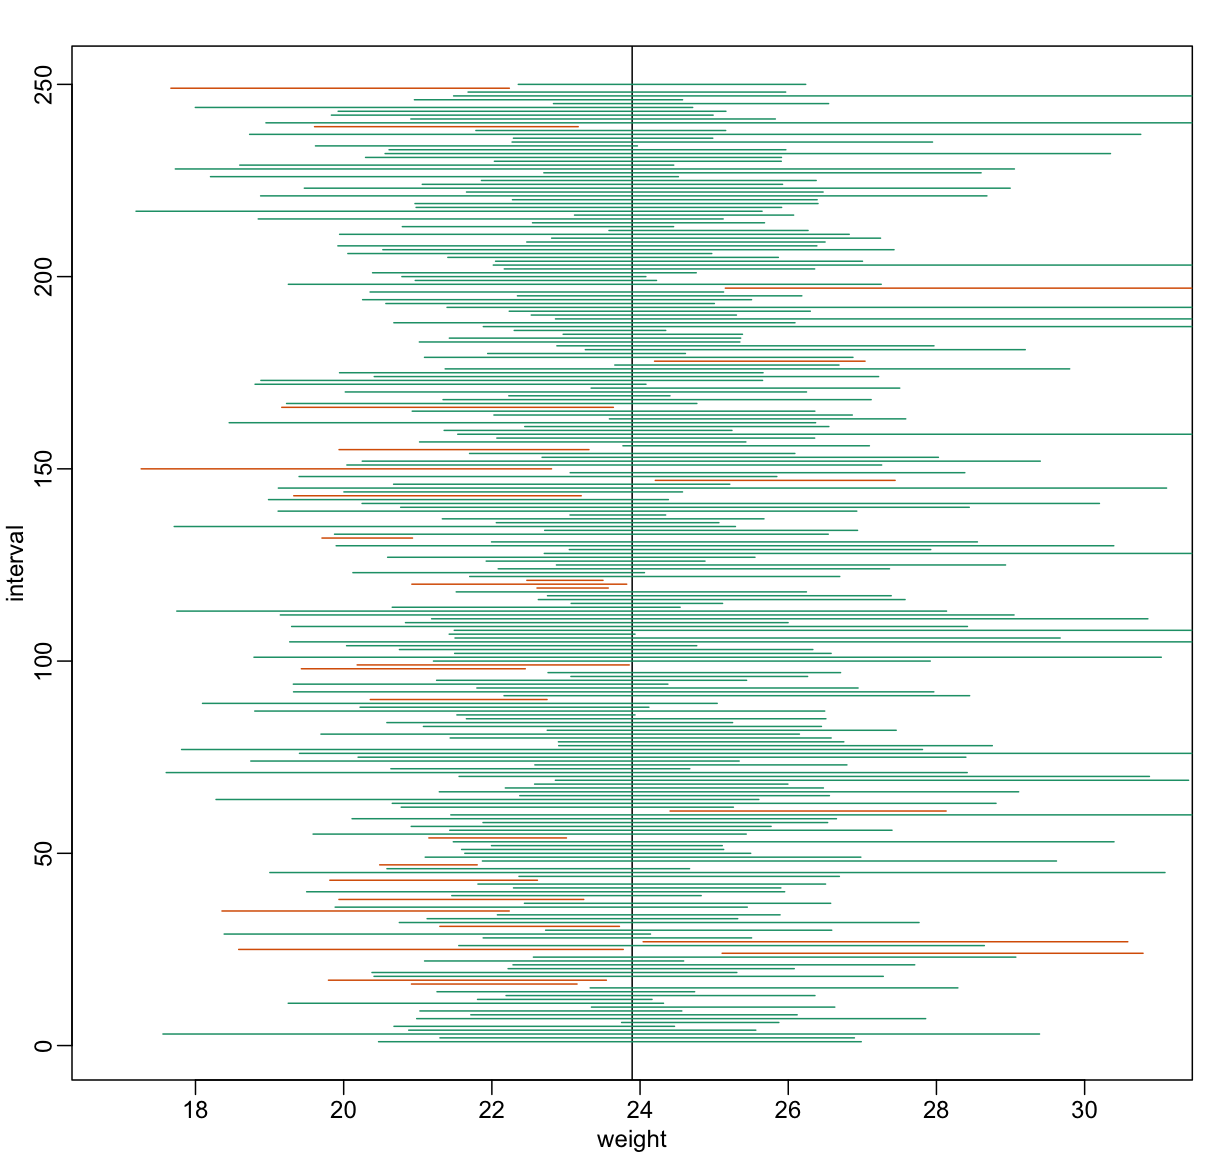 We show 250 random realizations of 95% confidence intervals, but now for a smaller sample size. The confidence interval is based on the CLT approximation. The color denotes if the interval fell on the parameter or not.